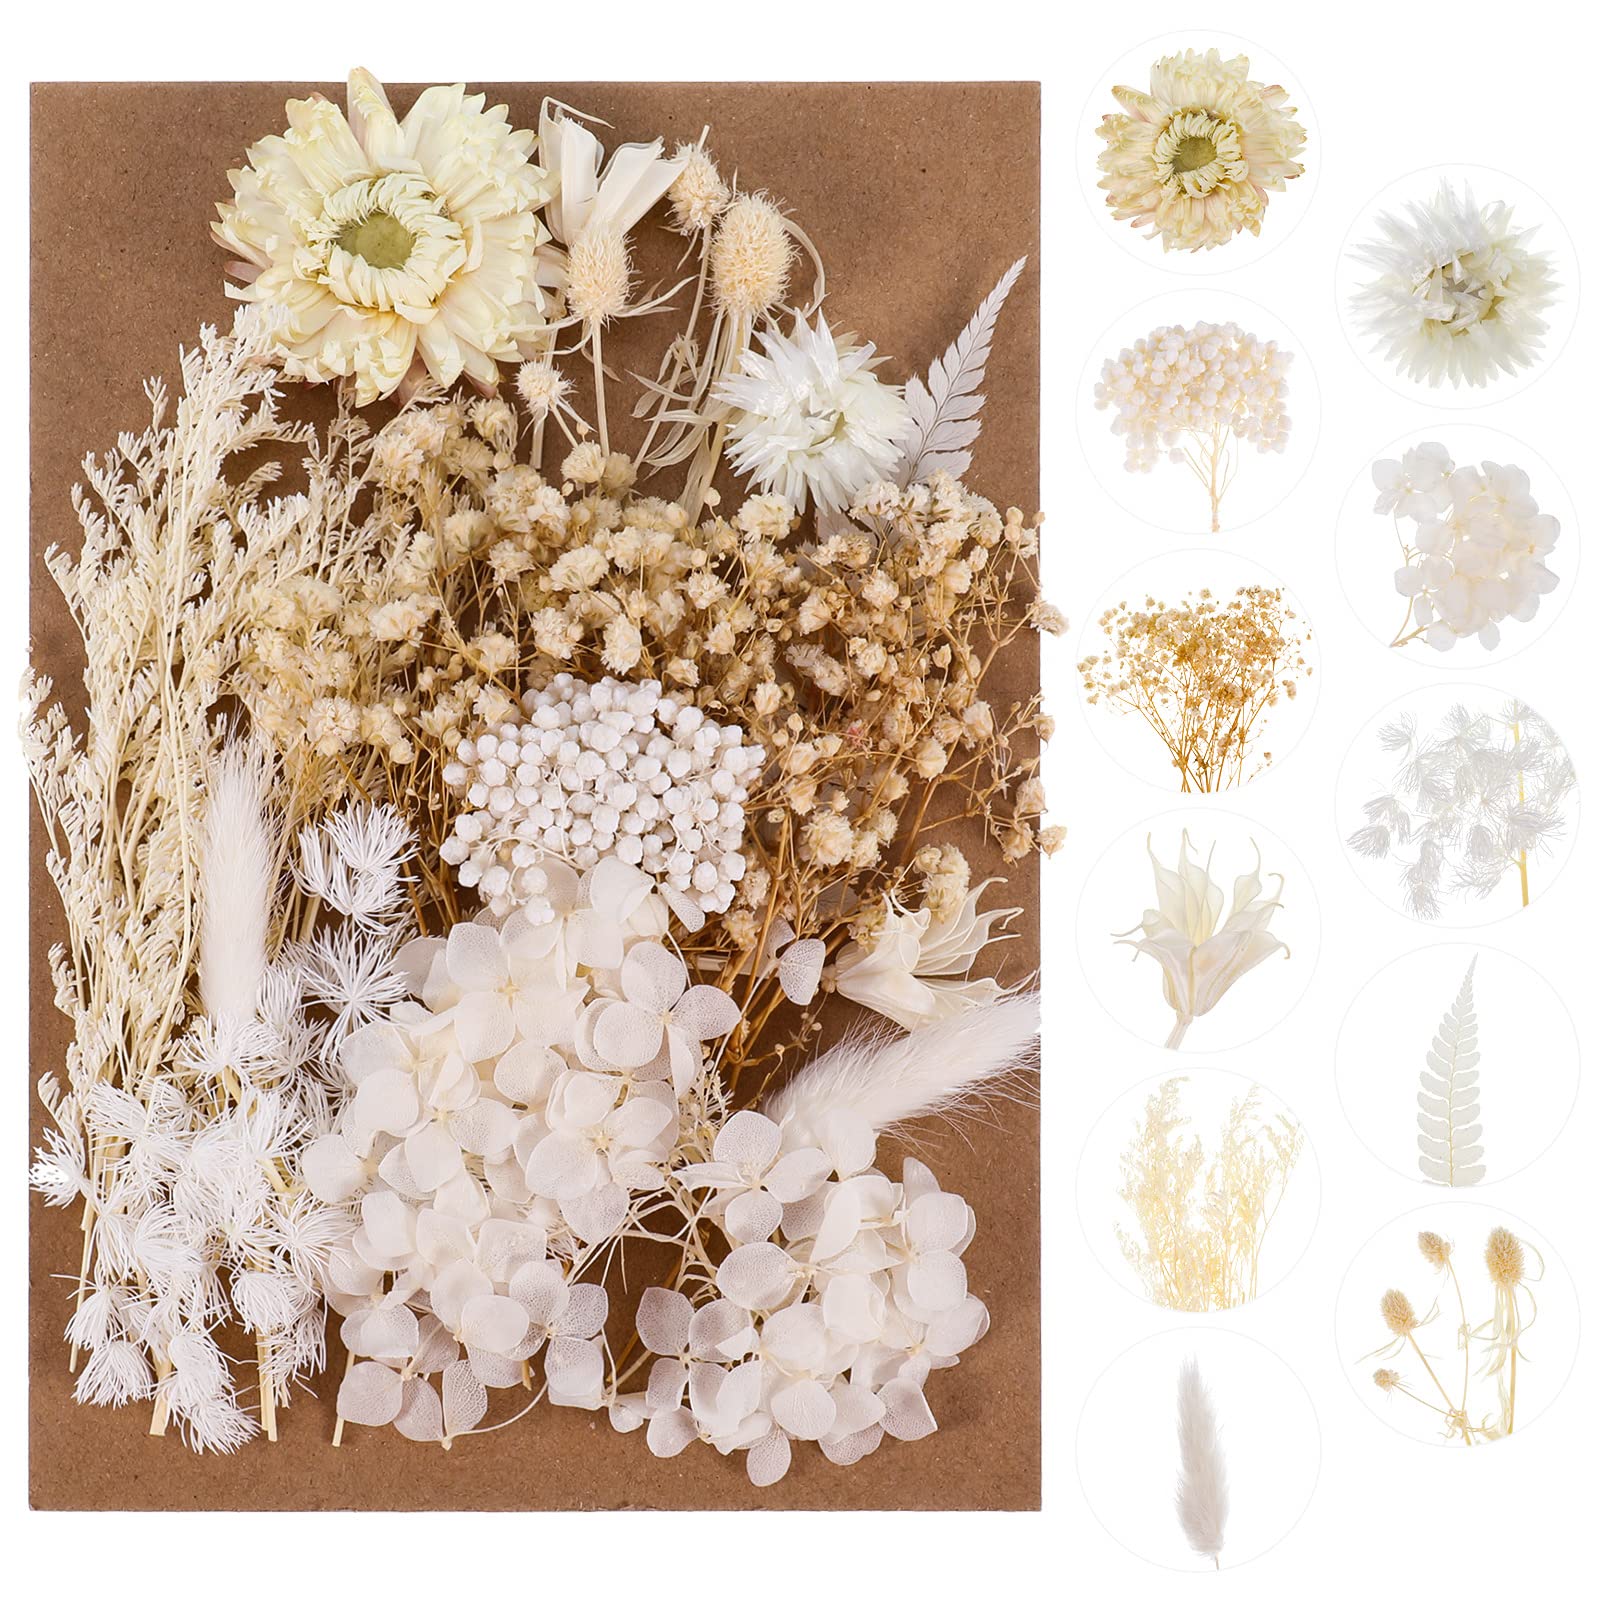 Natural Dried Pressed Flowers And Leaves For Home Decoration Artwork Crafts